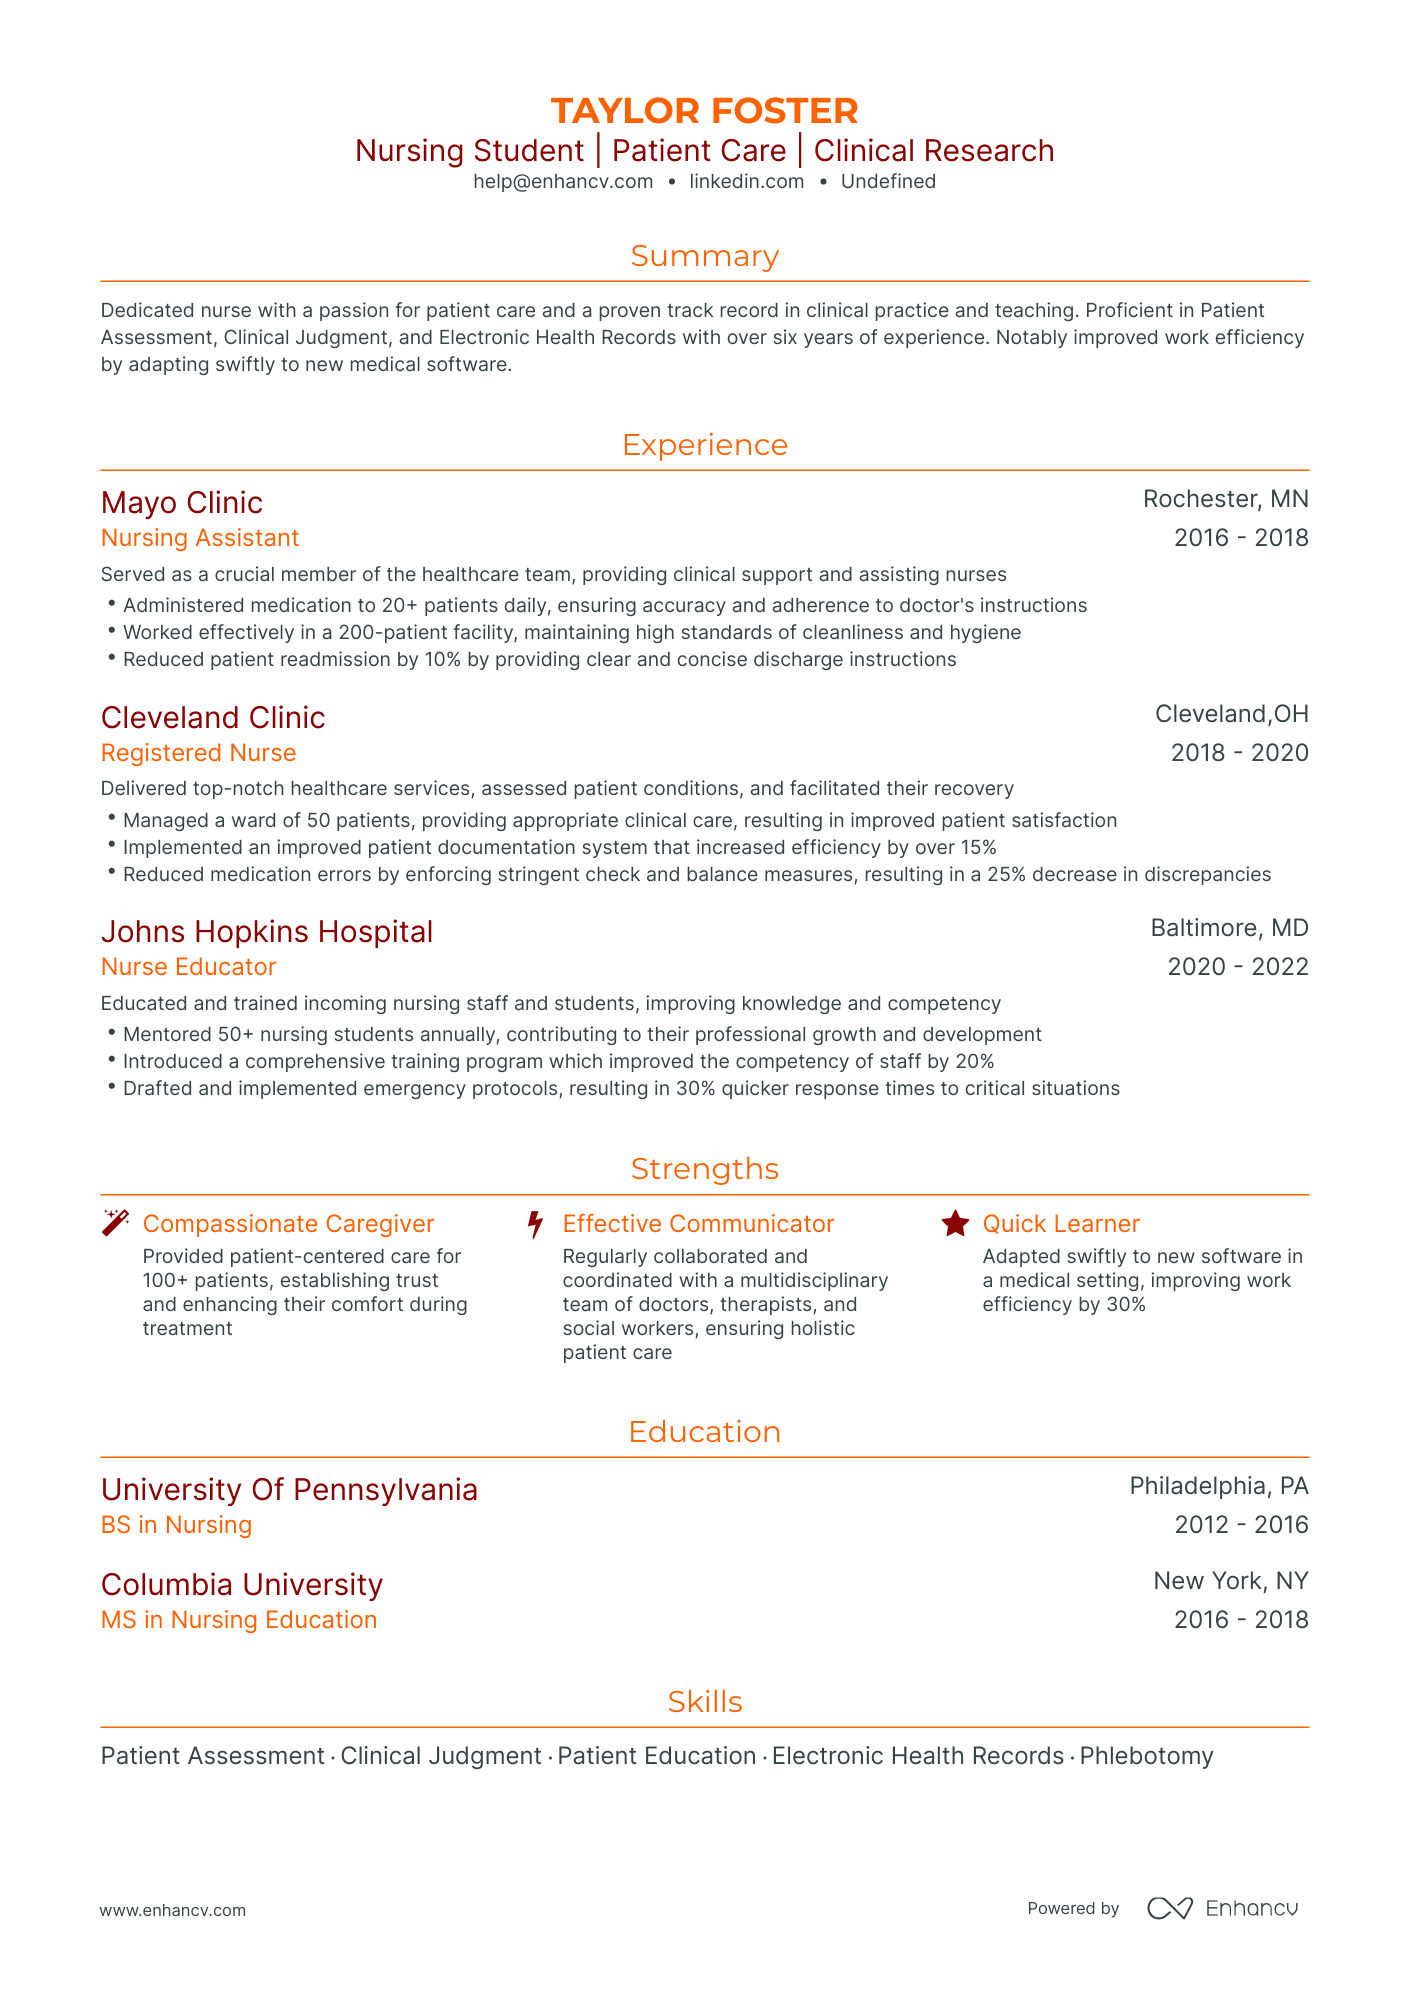 help with writing clinical experience and skills on resume